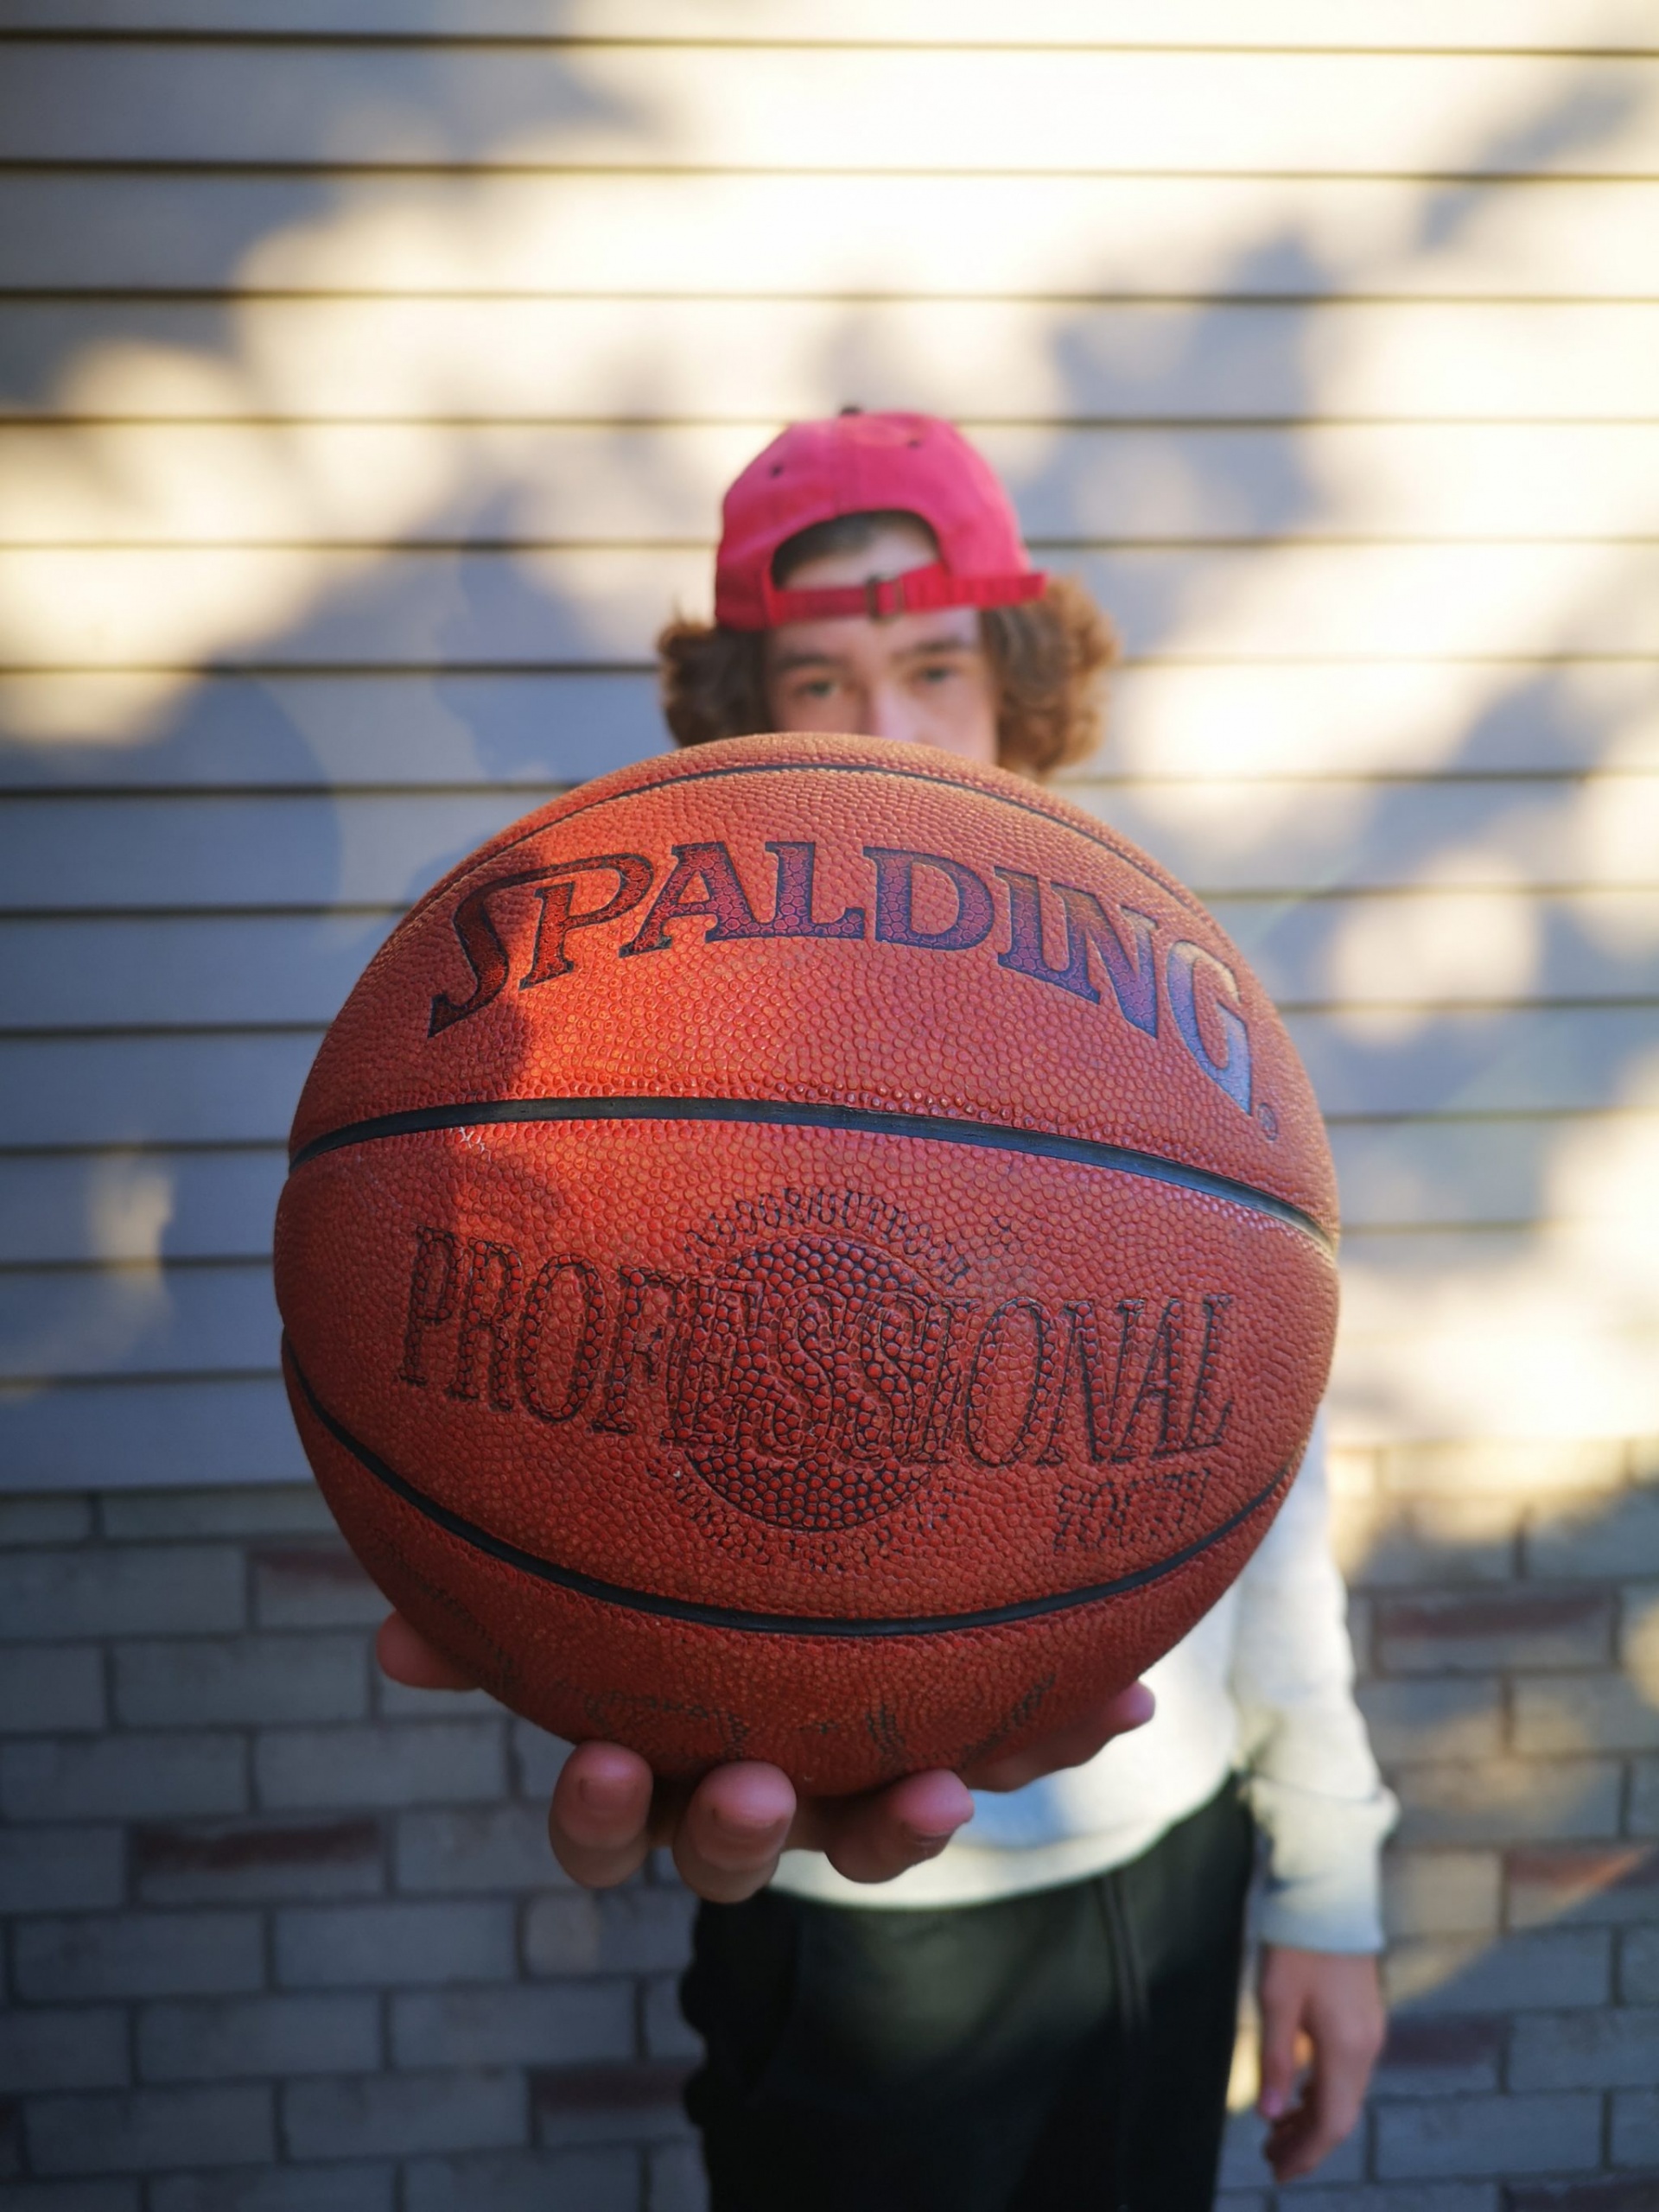 A young man holding a Spalding basketball out towards the camera